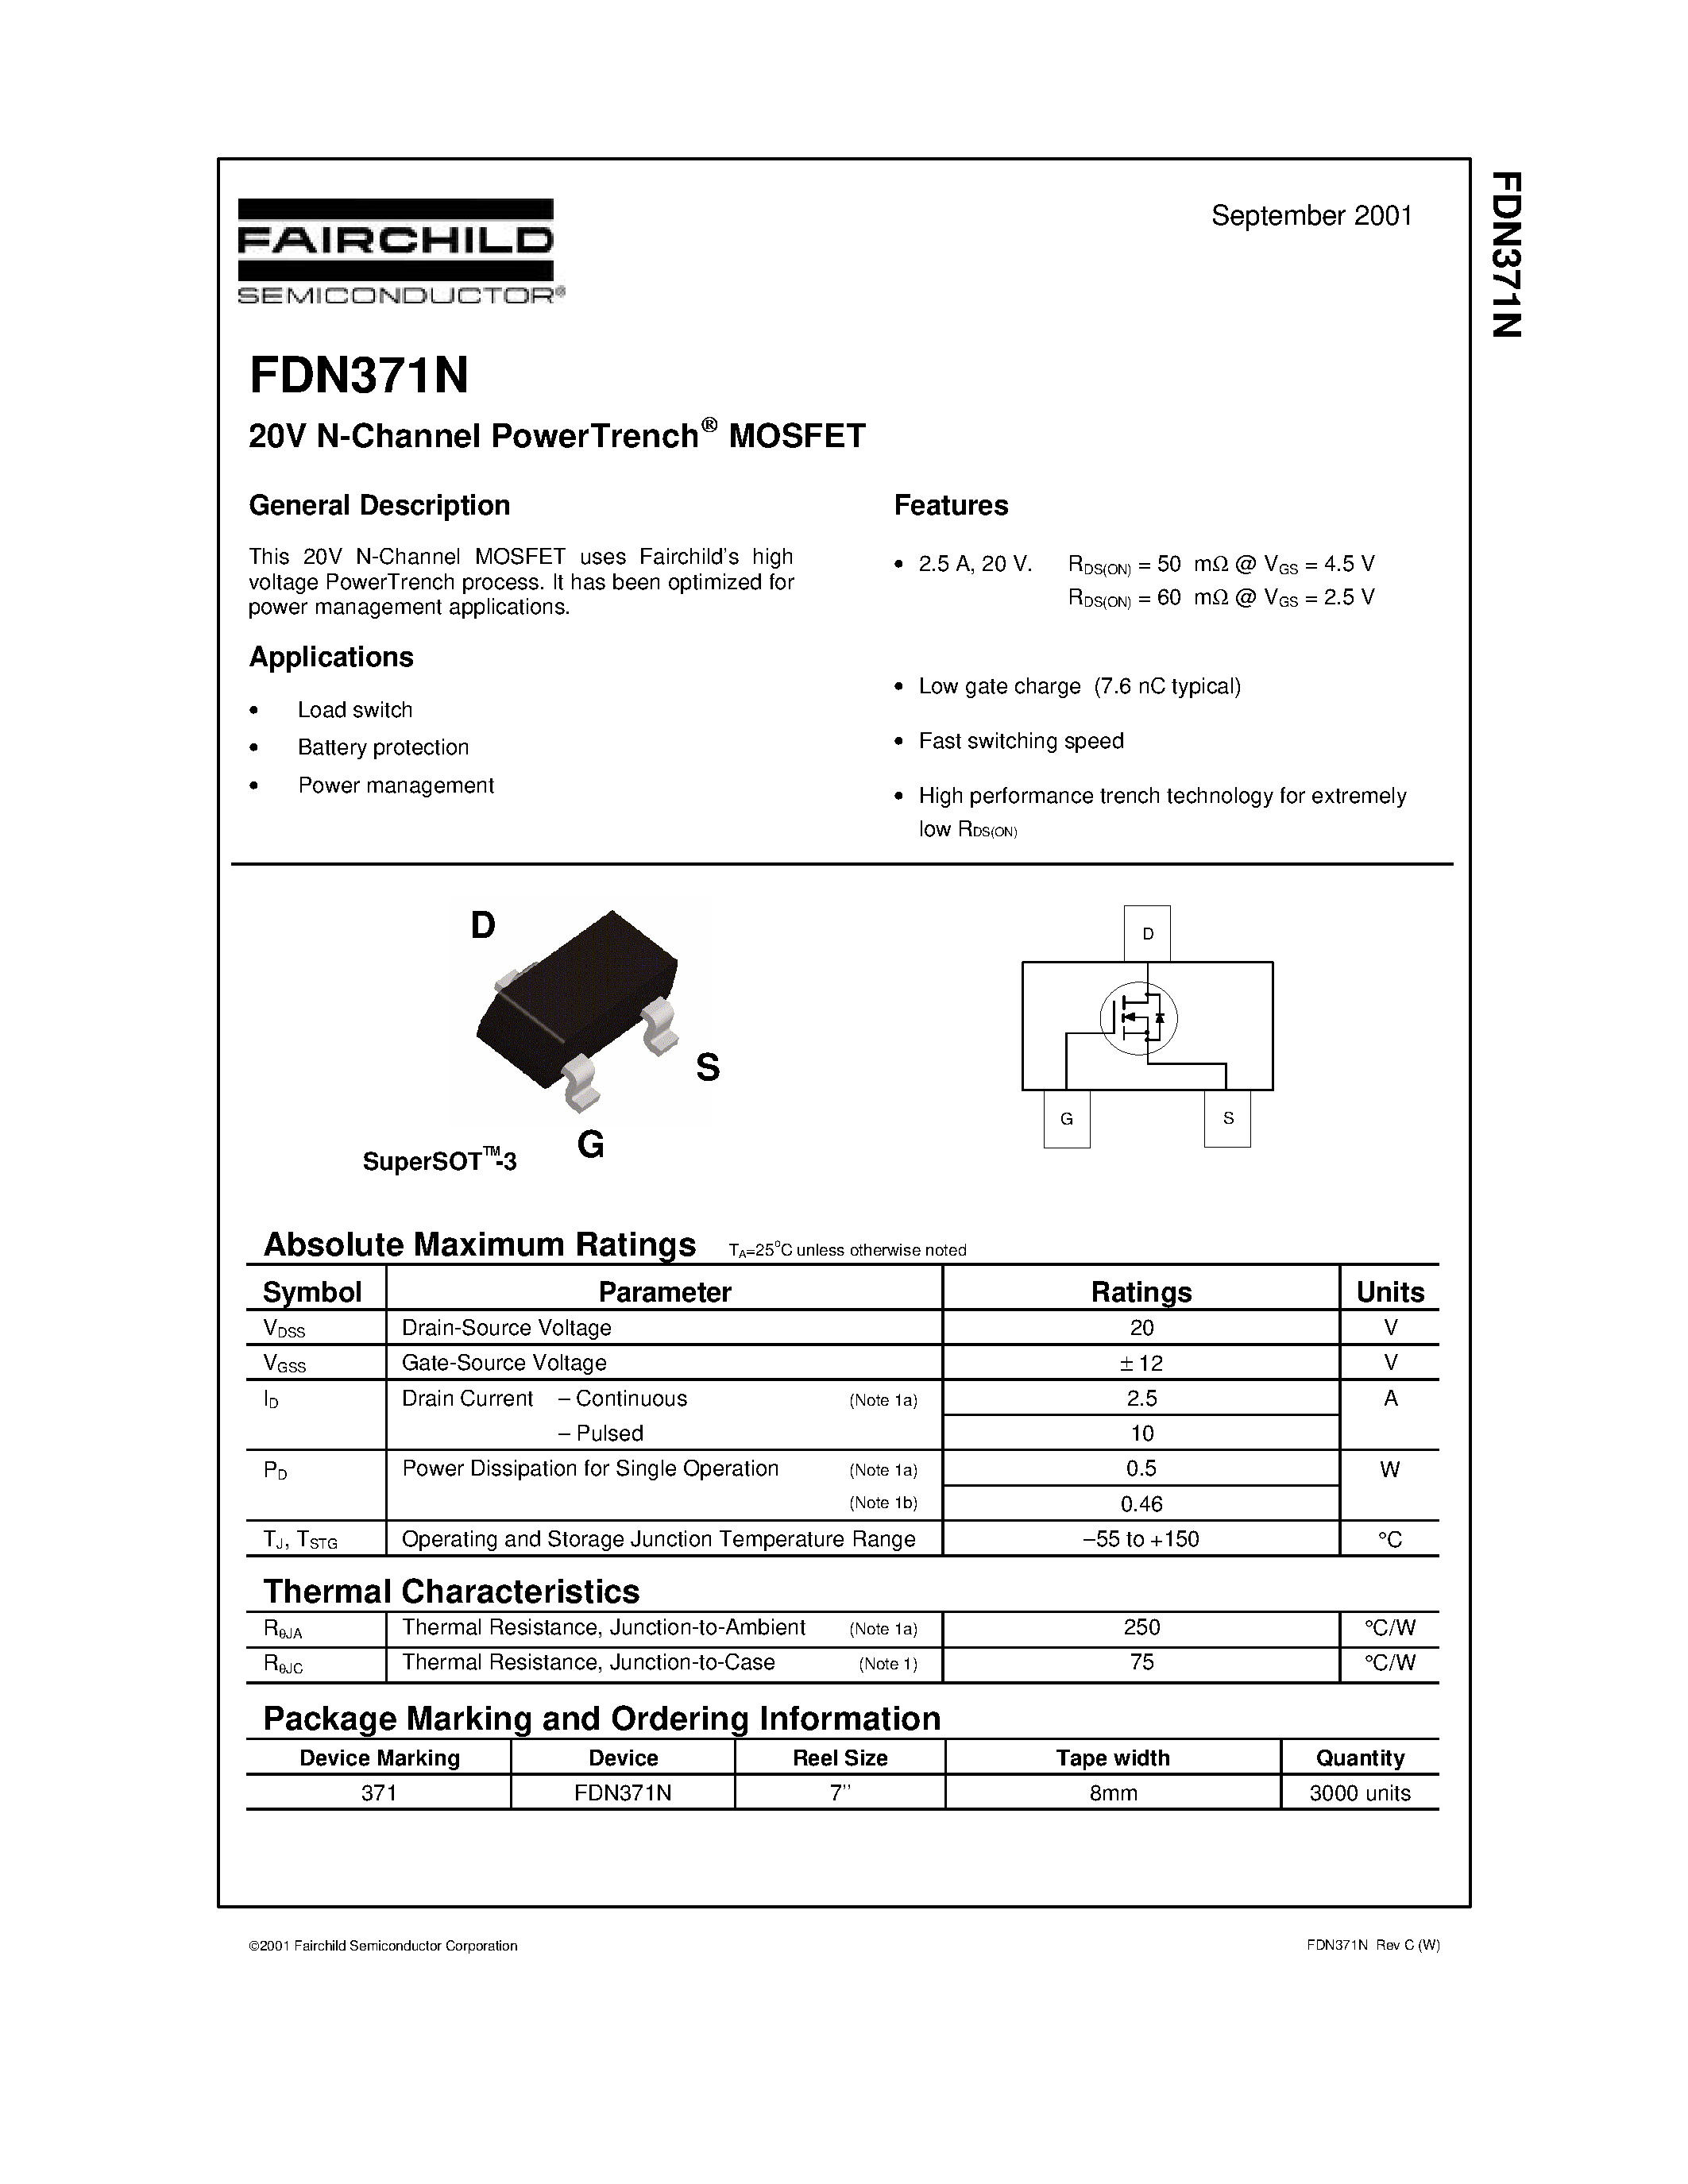 Даташит FDN371N - 20V N-Channel PowerTrench MOSFET страница 1